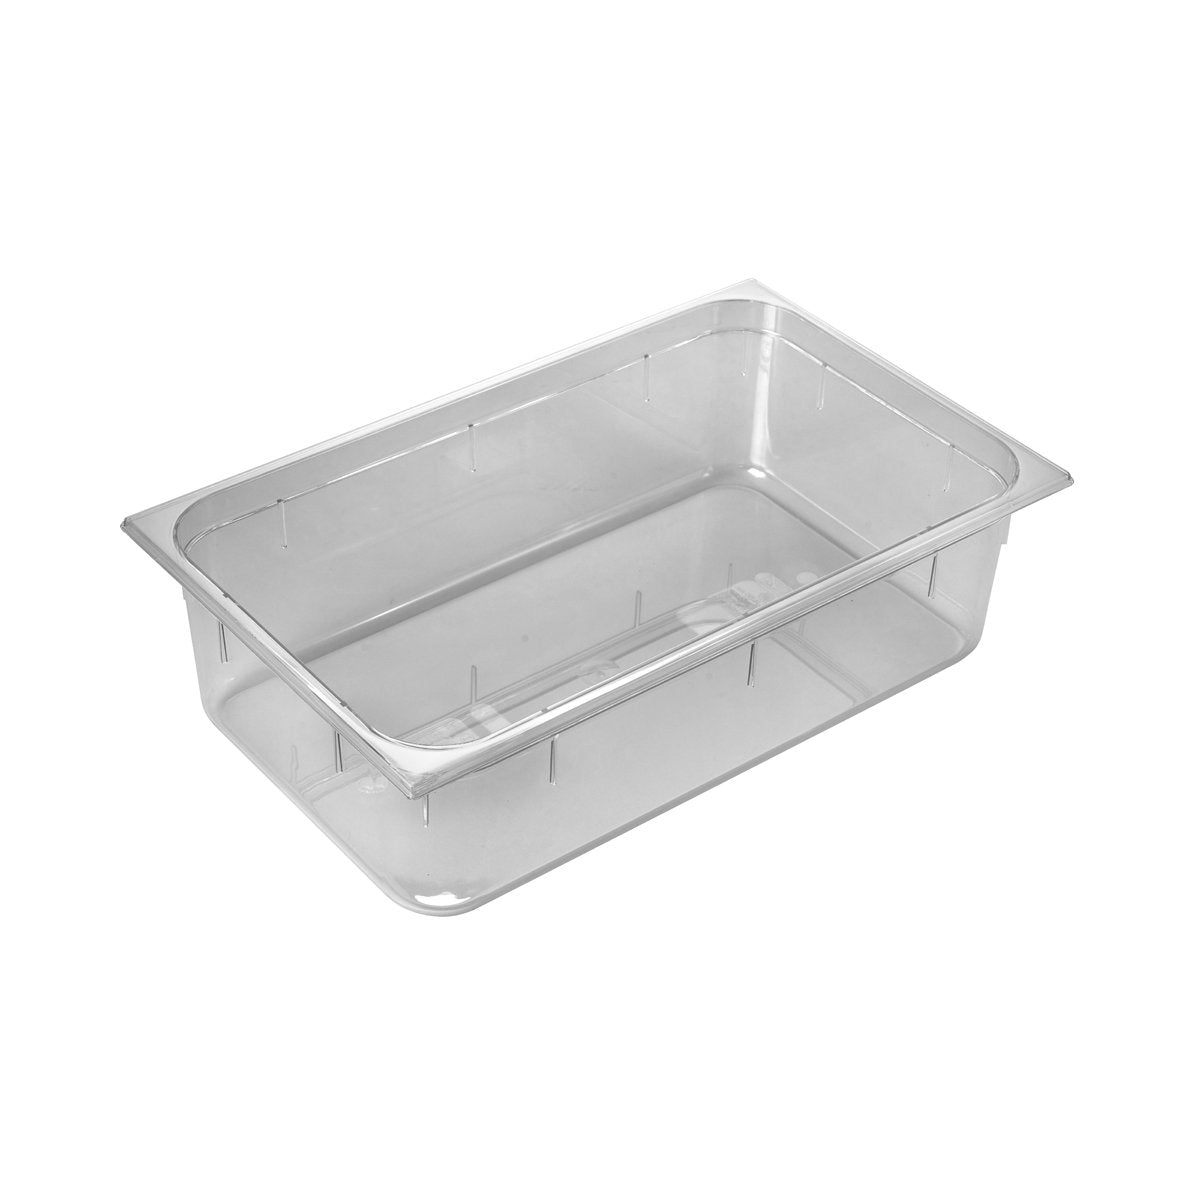 PC-11150CL Inox Macel Gastronorm Pan Polycarbonate Clear 1/1 Size 150mm Tomkin Australia Hospitality Supplies